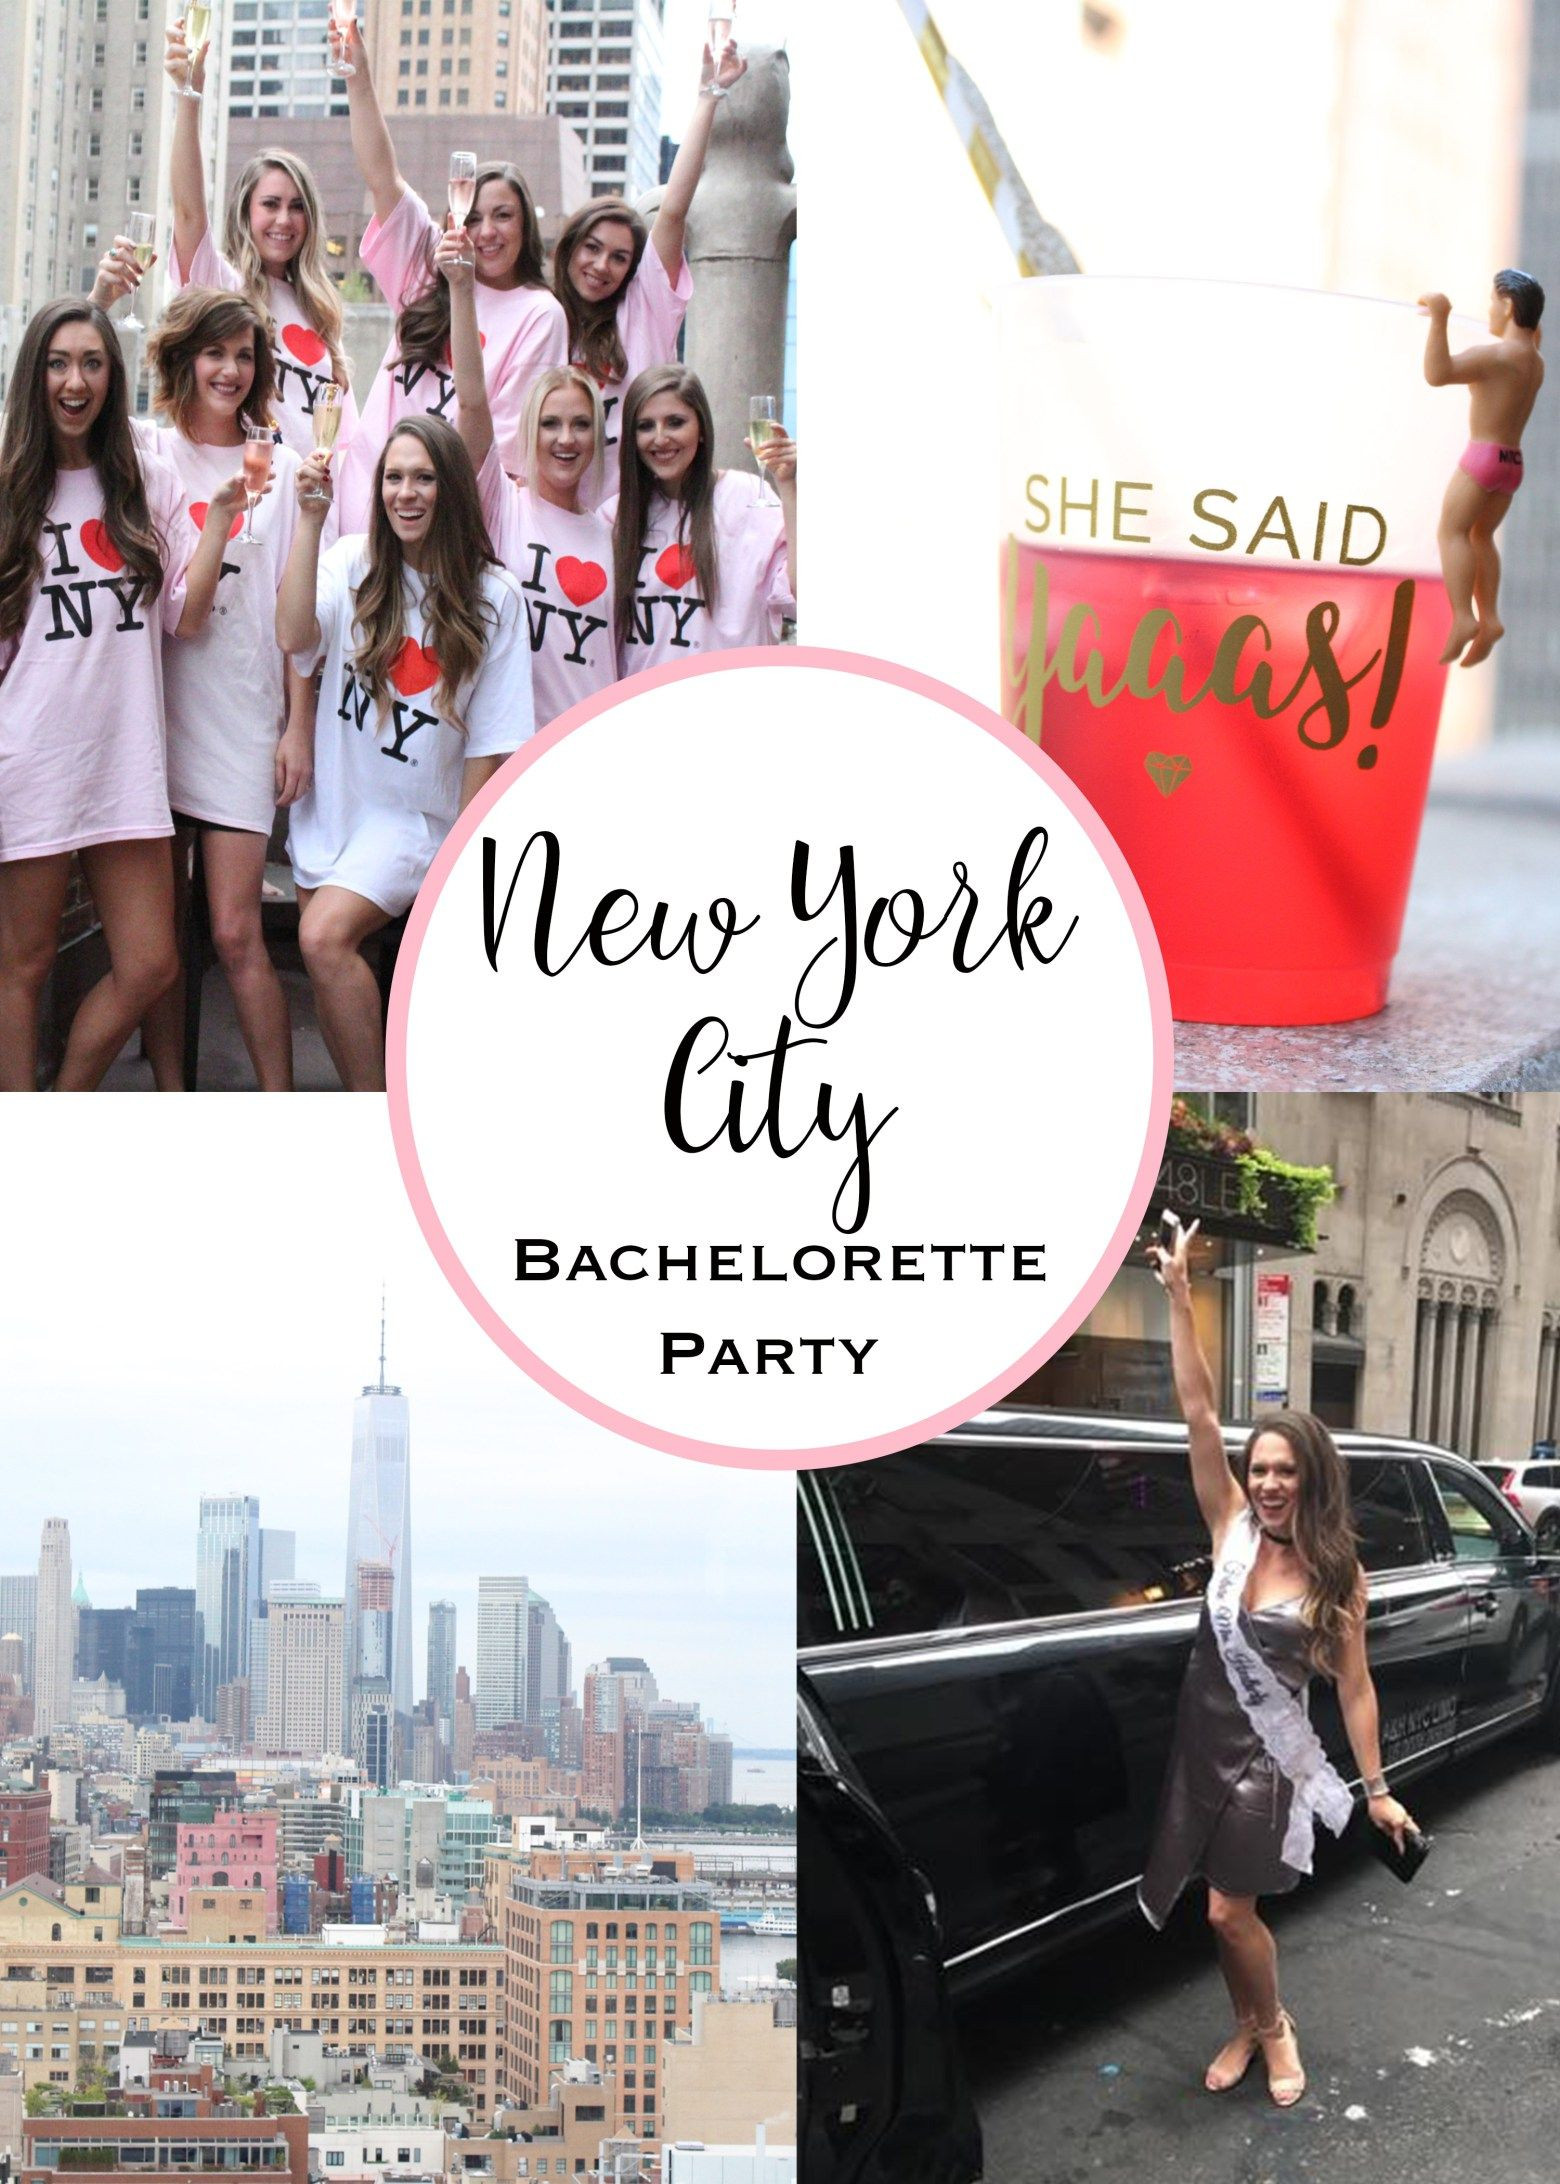 Best Bachelorette Party Ideas Nyc
 My NYC Bachelorette Party